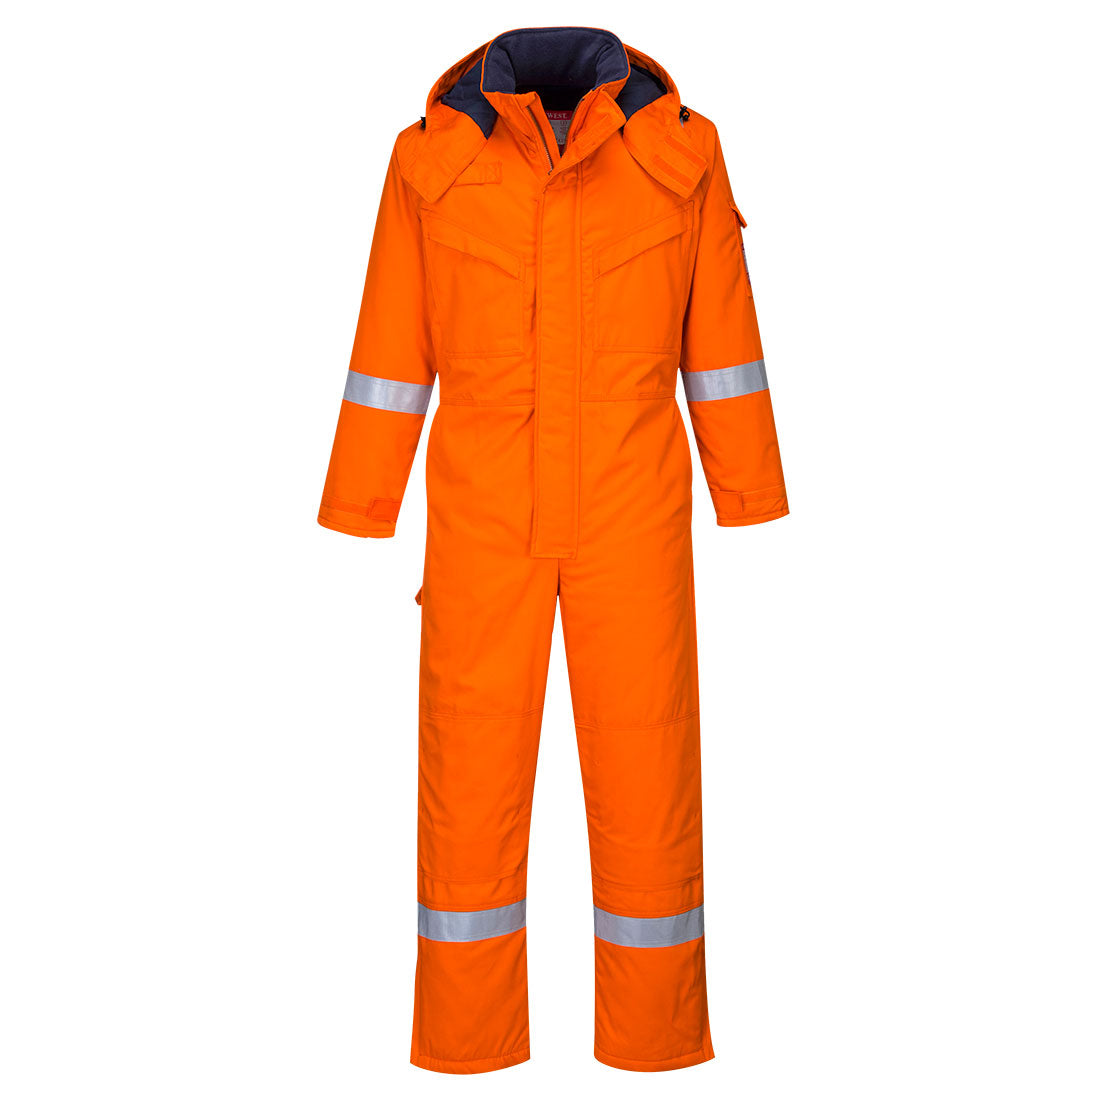 Portwest Flame Retardant Anti-static Insulated Winter Coverall - FR53